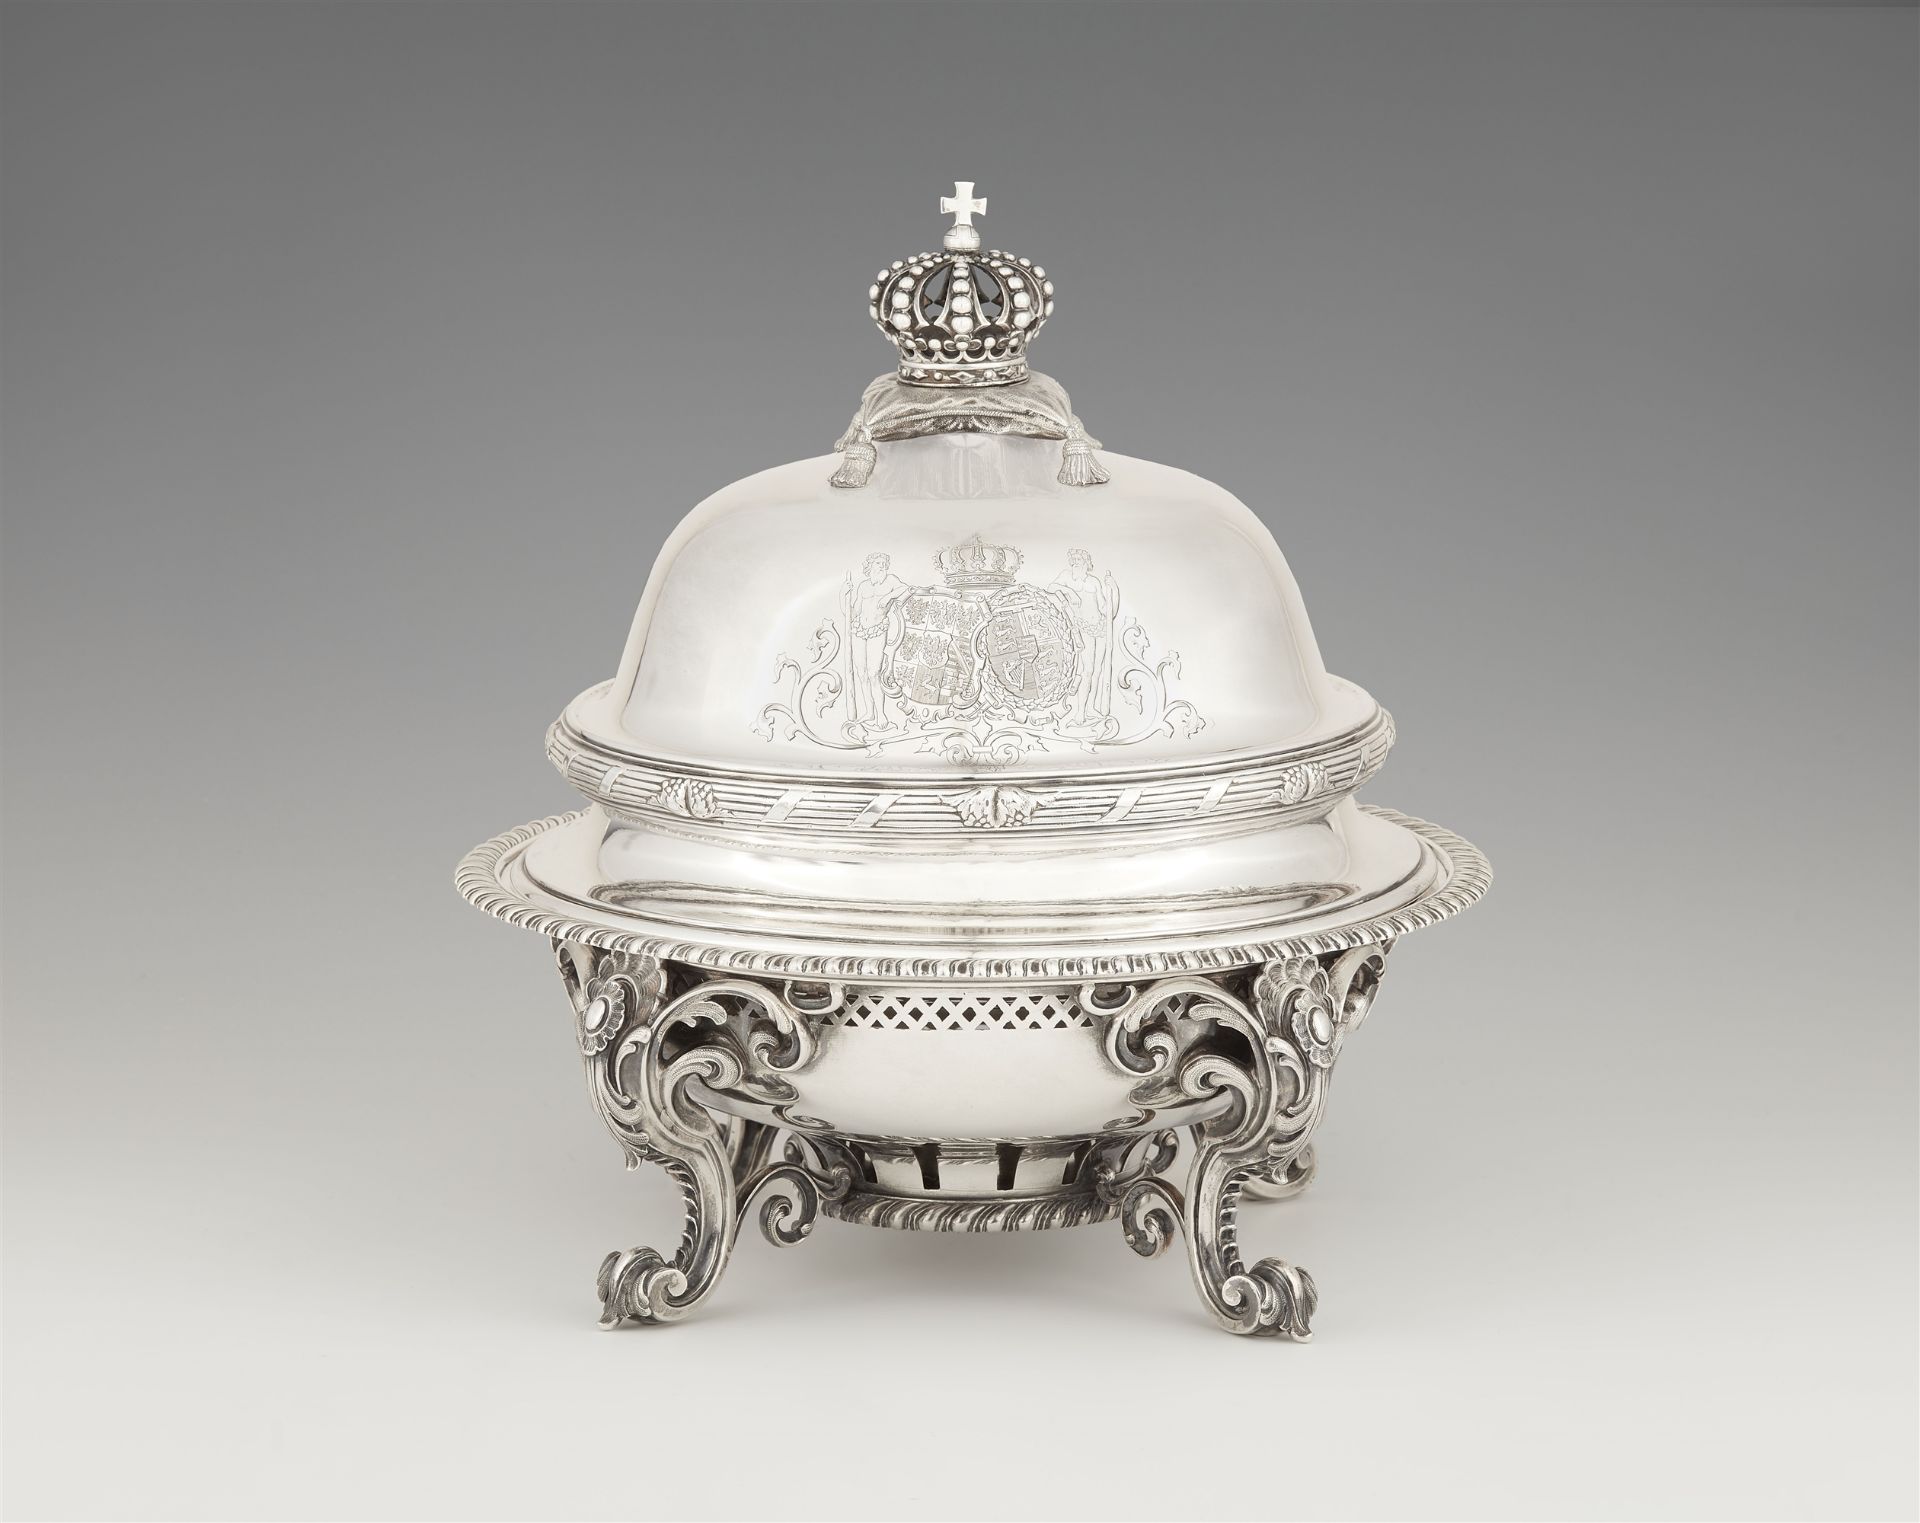 A silver rechaud and cloche made for Prince Frederick William and Princess Victoria of Prussia